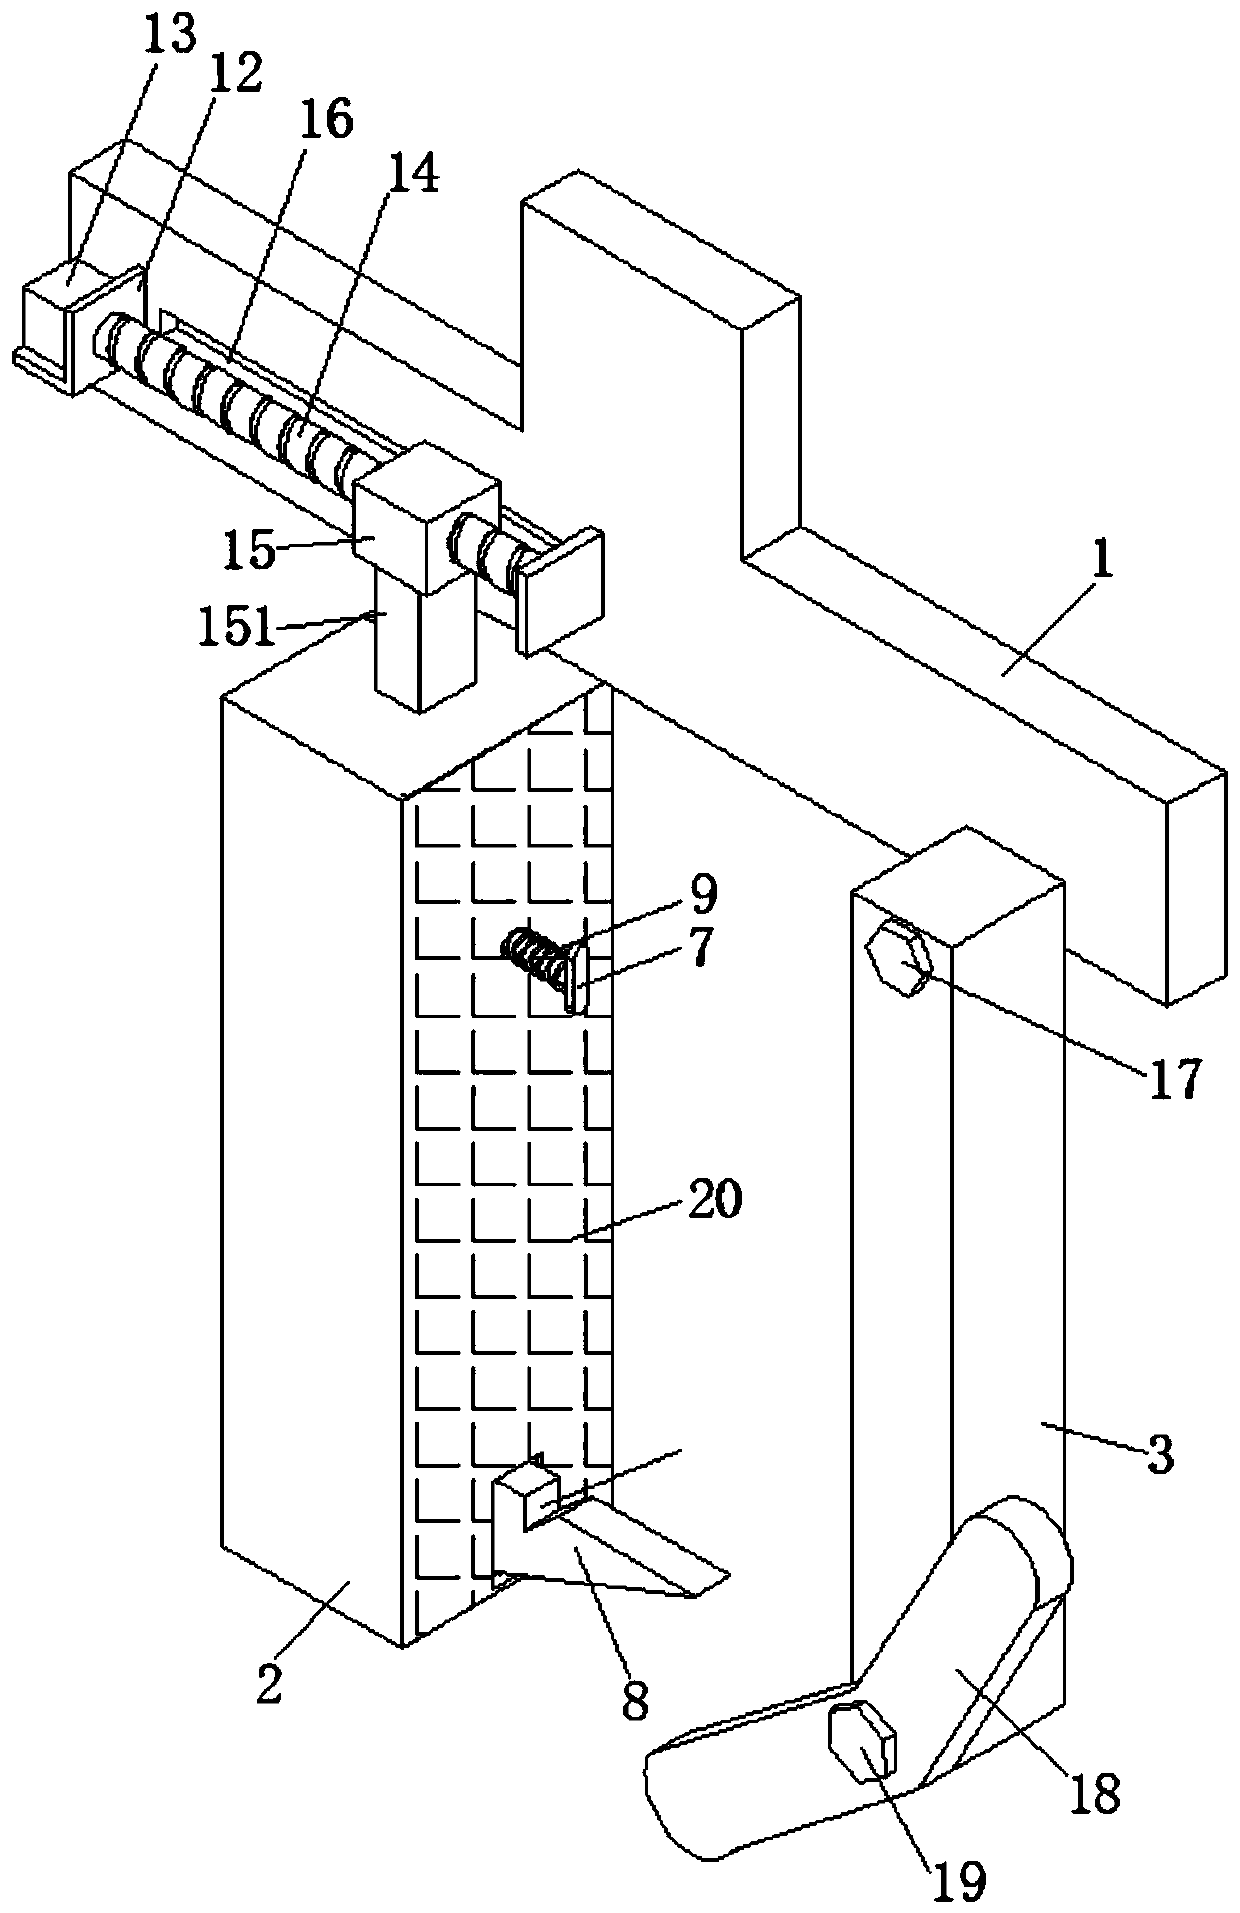 A clamping mechanism for industrial robots